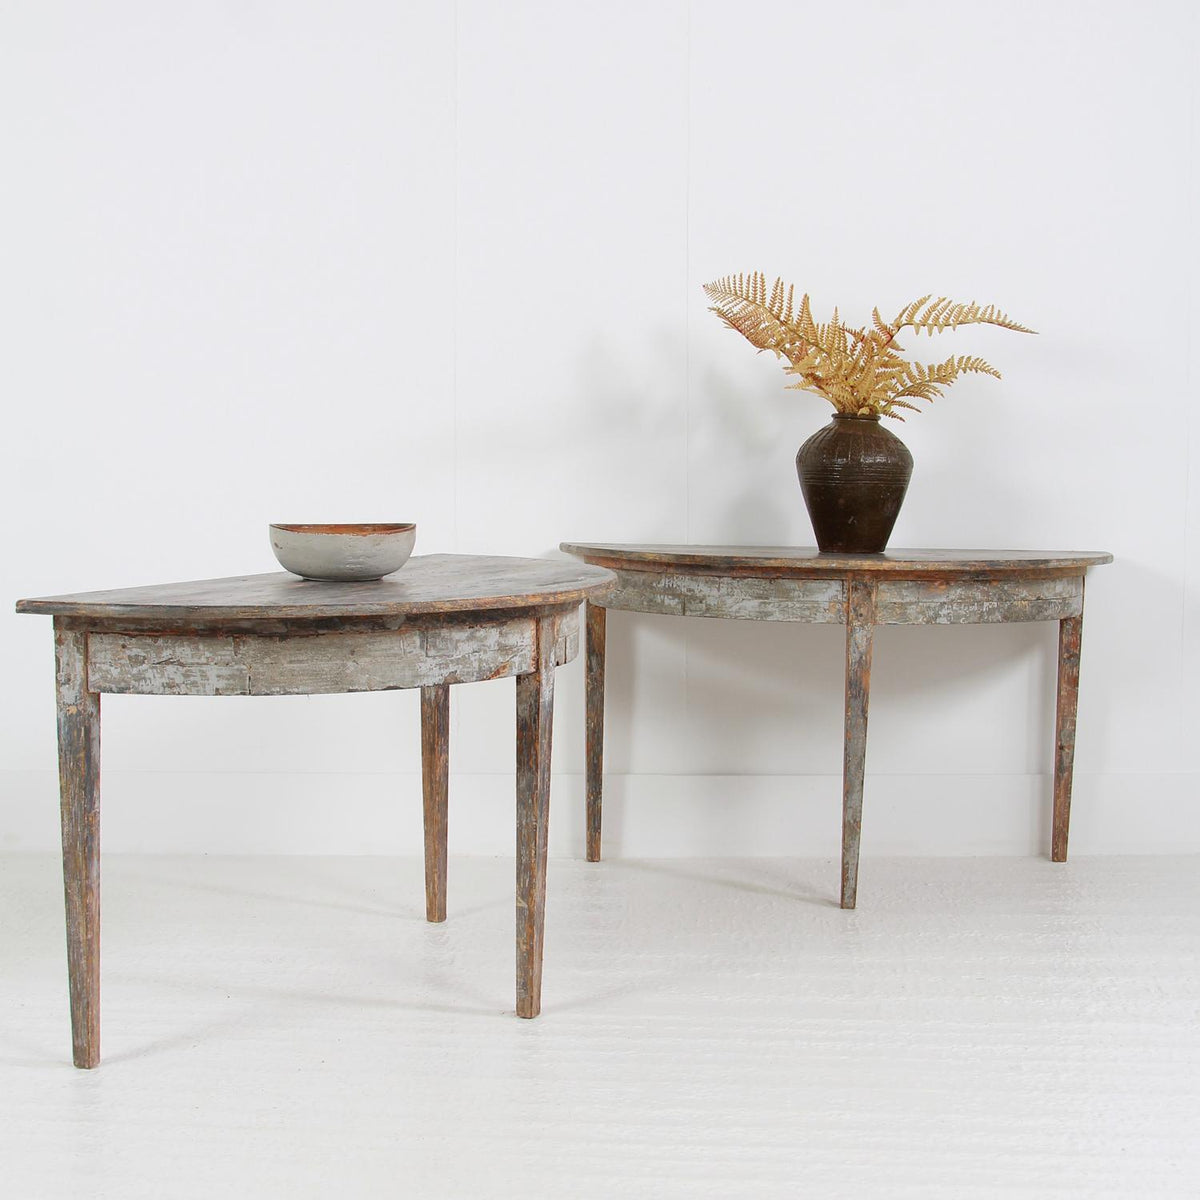 A Wonderful Pair of 19thC Swedish Painted Demi-lunes or Console tables